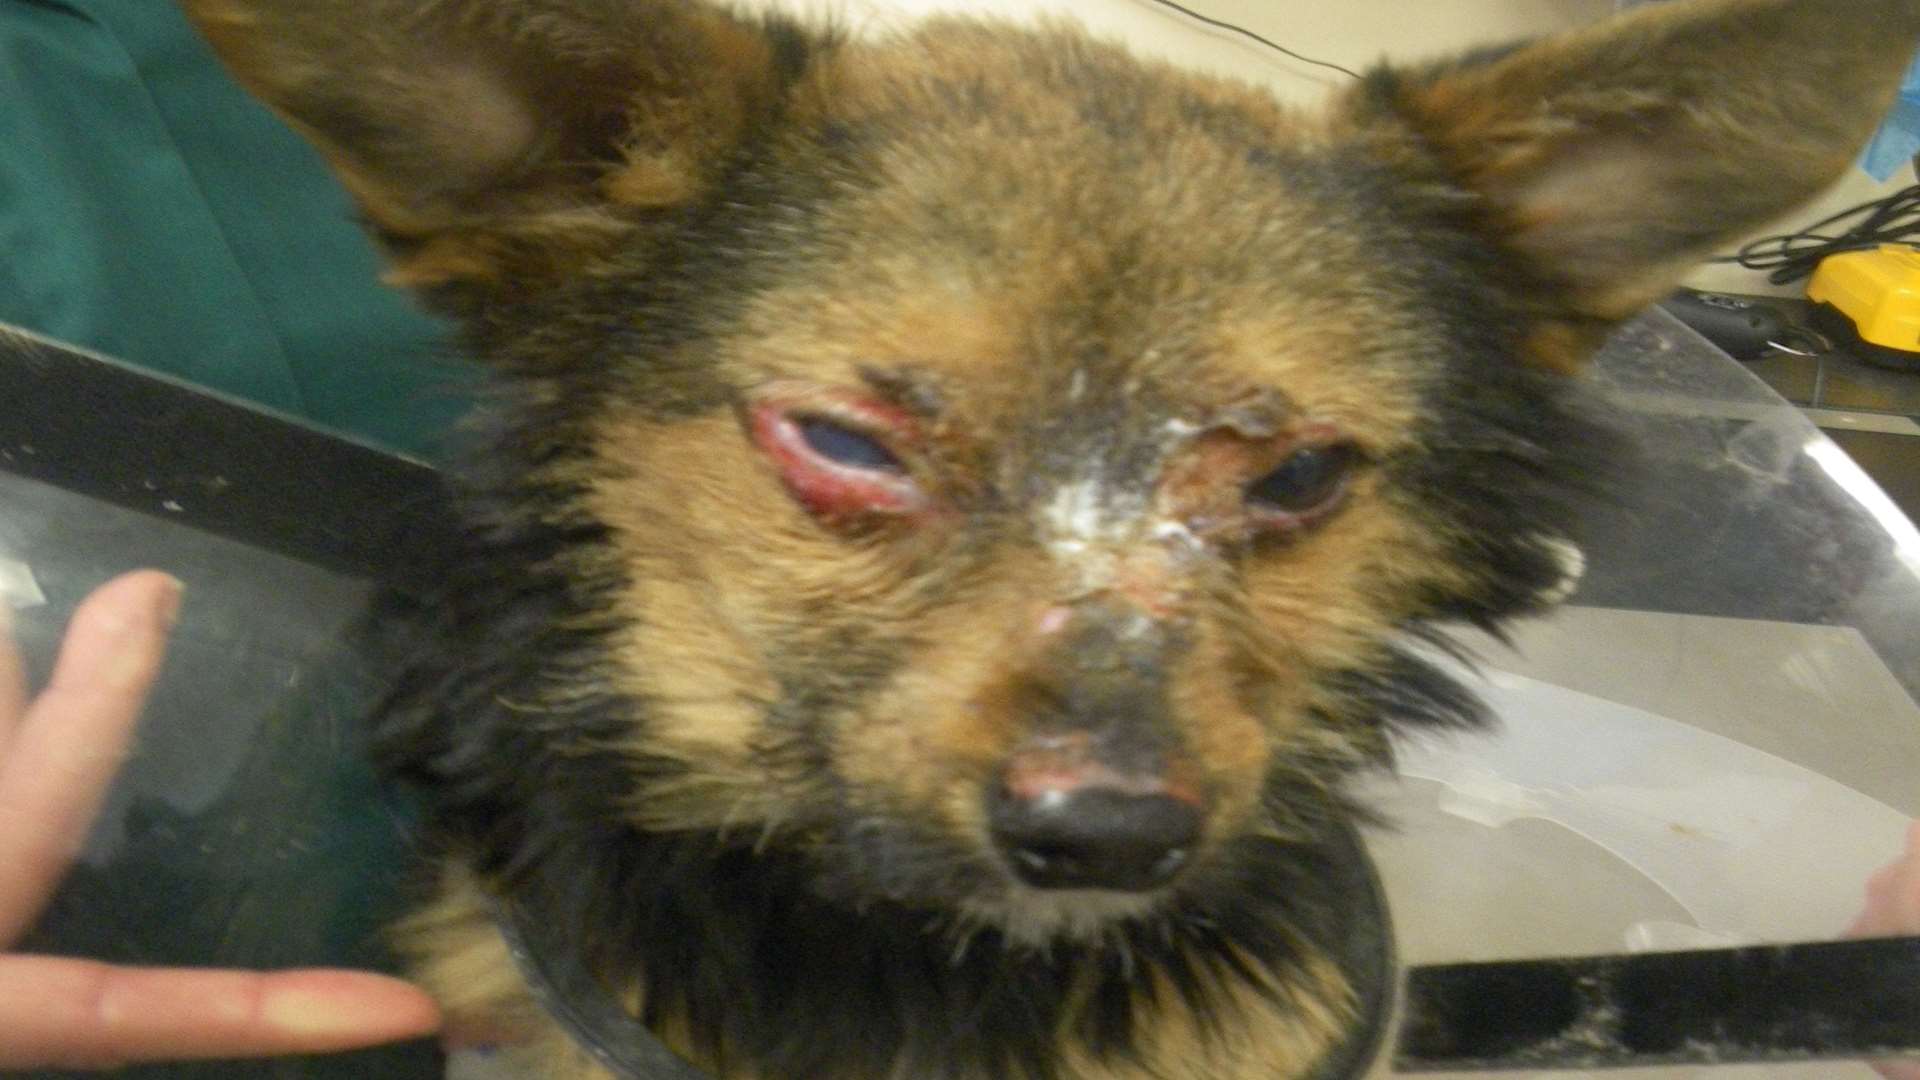 The Chihuahua cross being cared for by vets